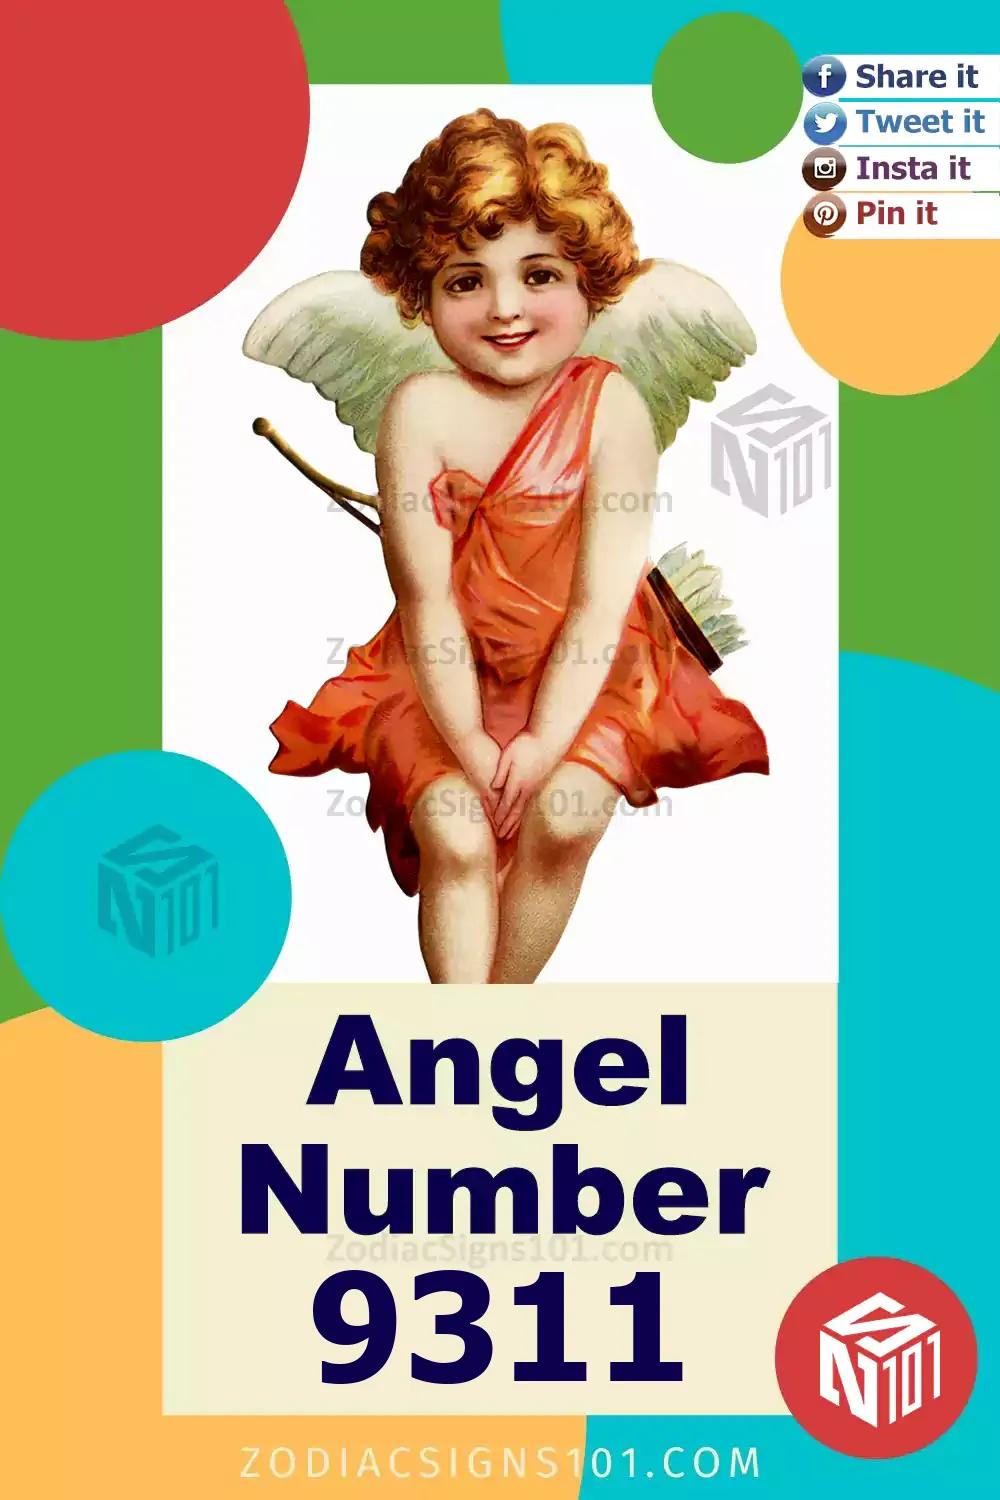 9311 Angel Number Meaning